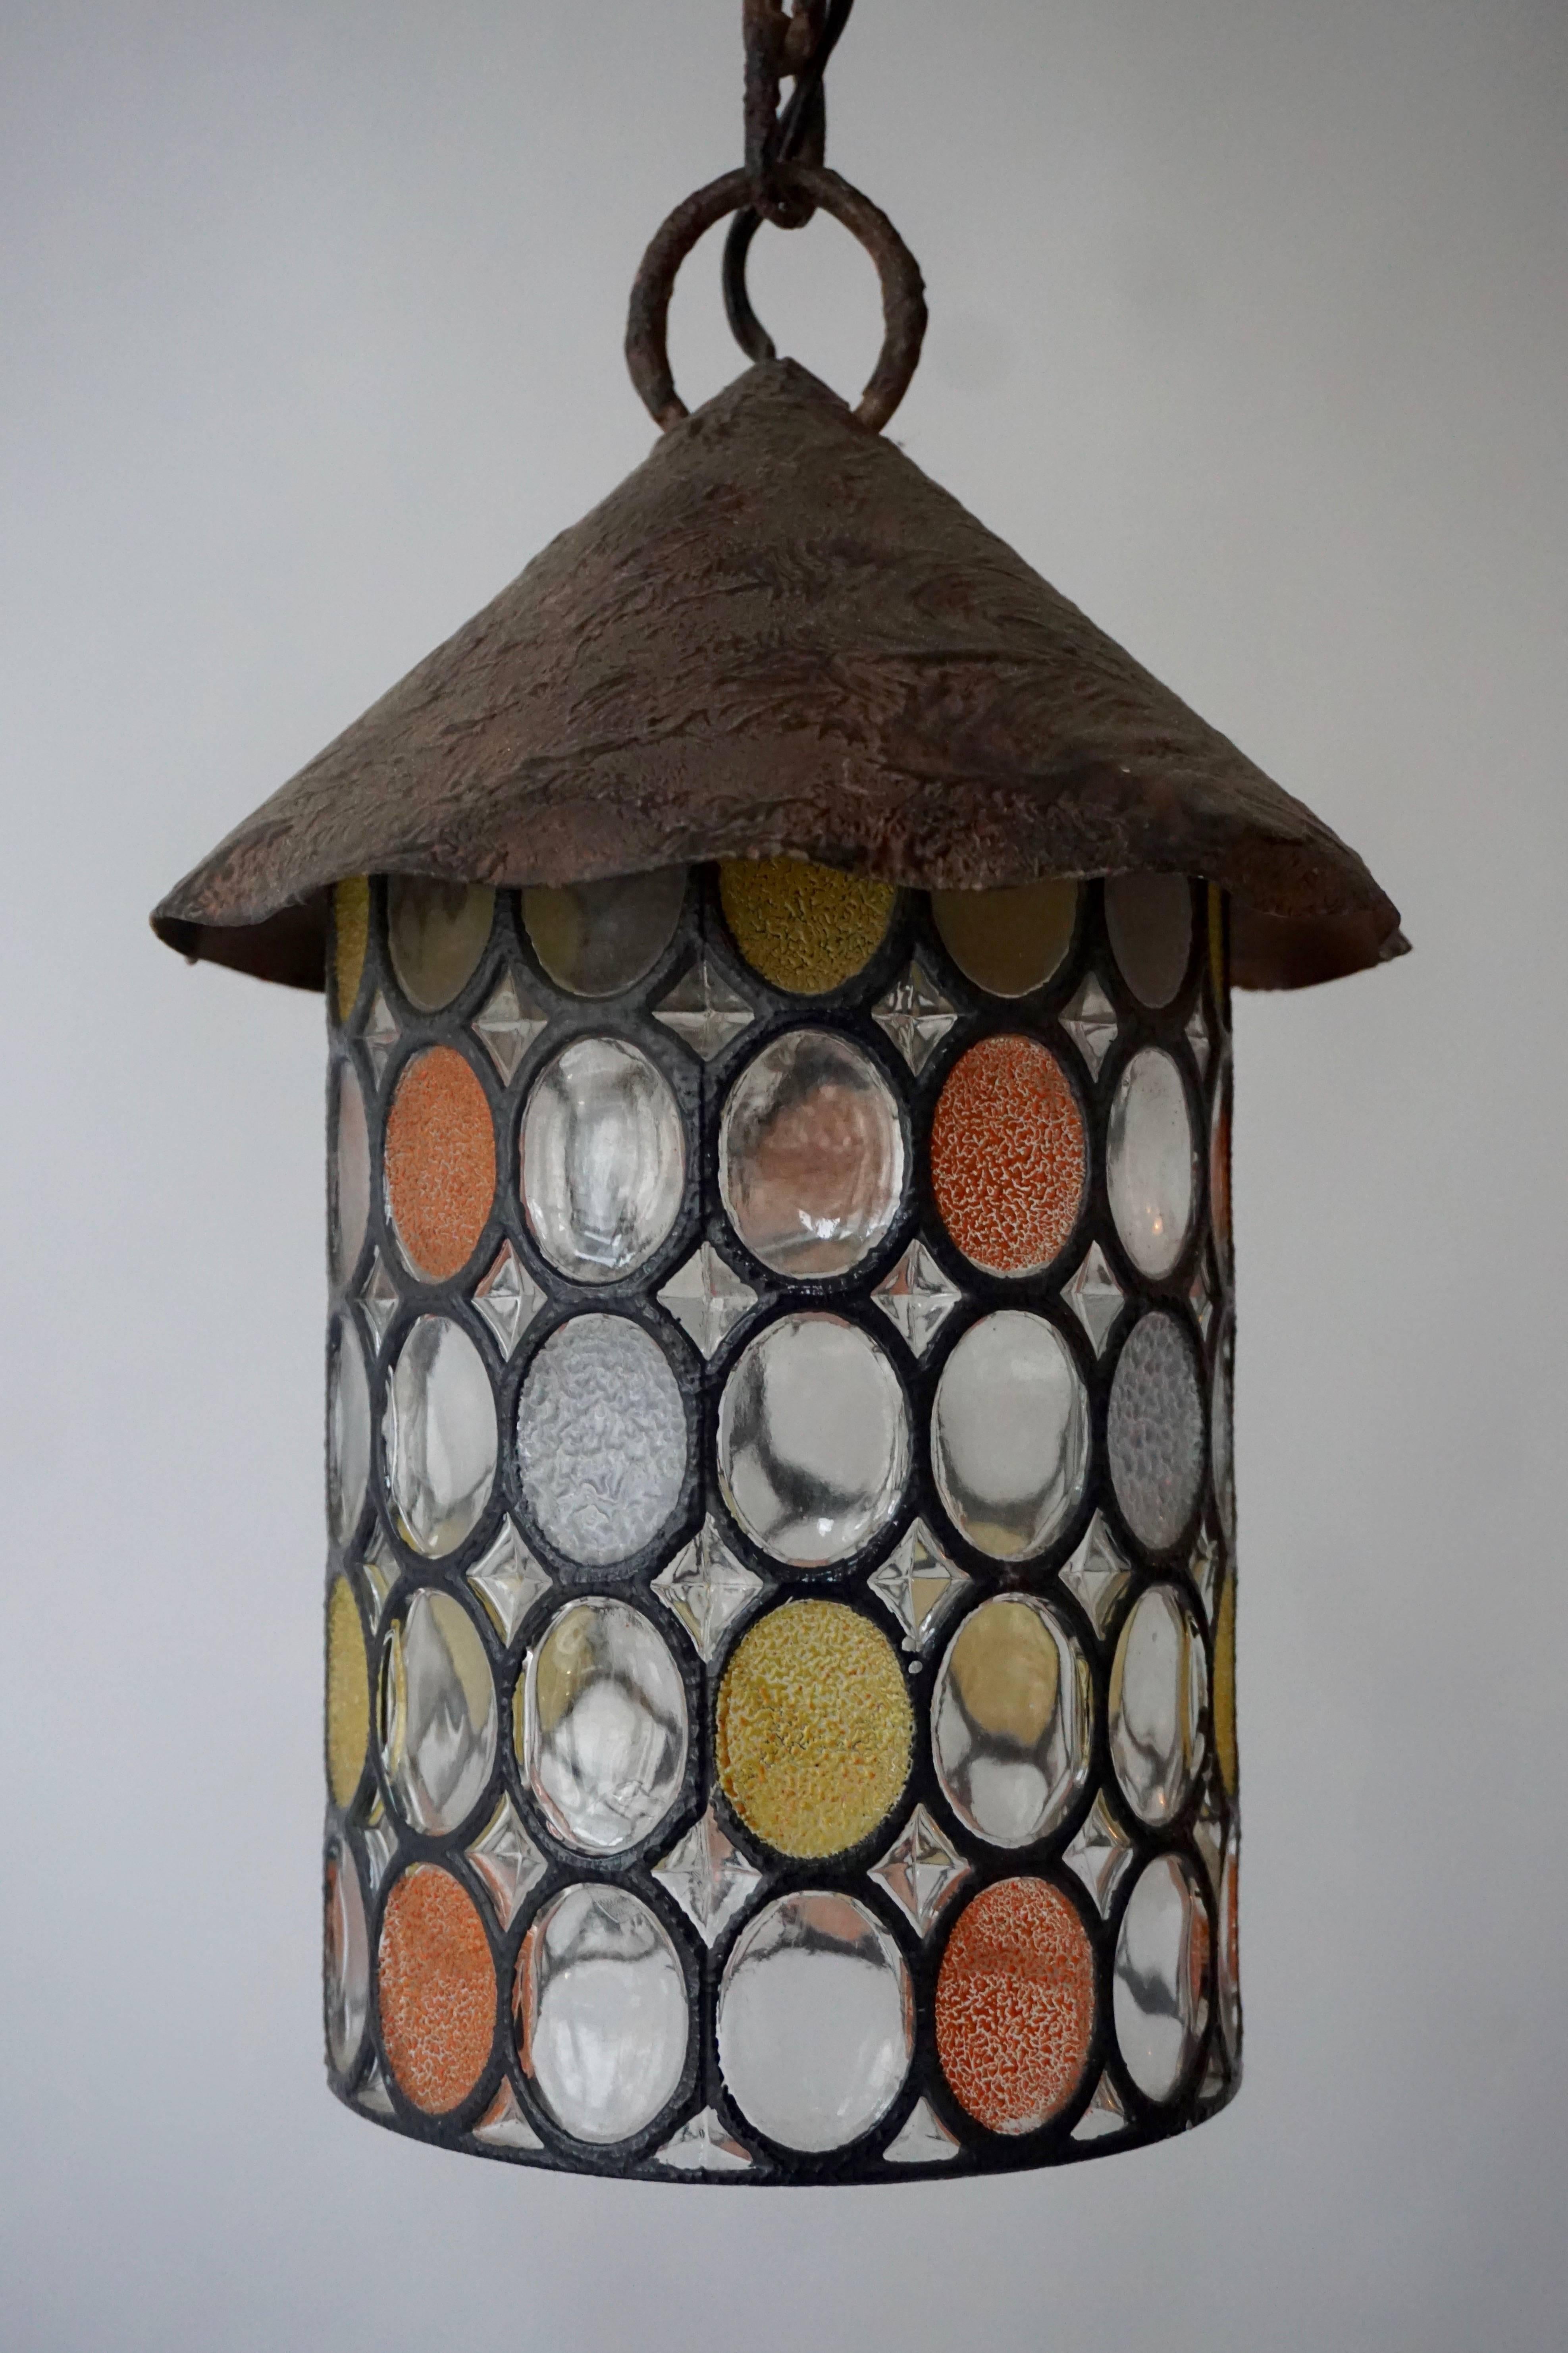 Italian stained glass lantern or pendant light fixture.
Height fixture 26 cm.
Total height with the chain is 70 cm.
Diameter 20 cm.